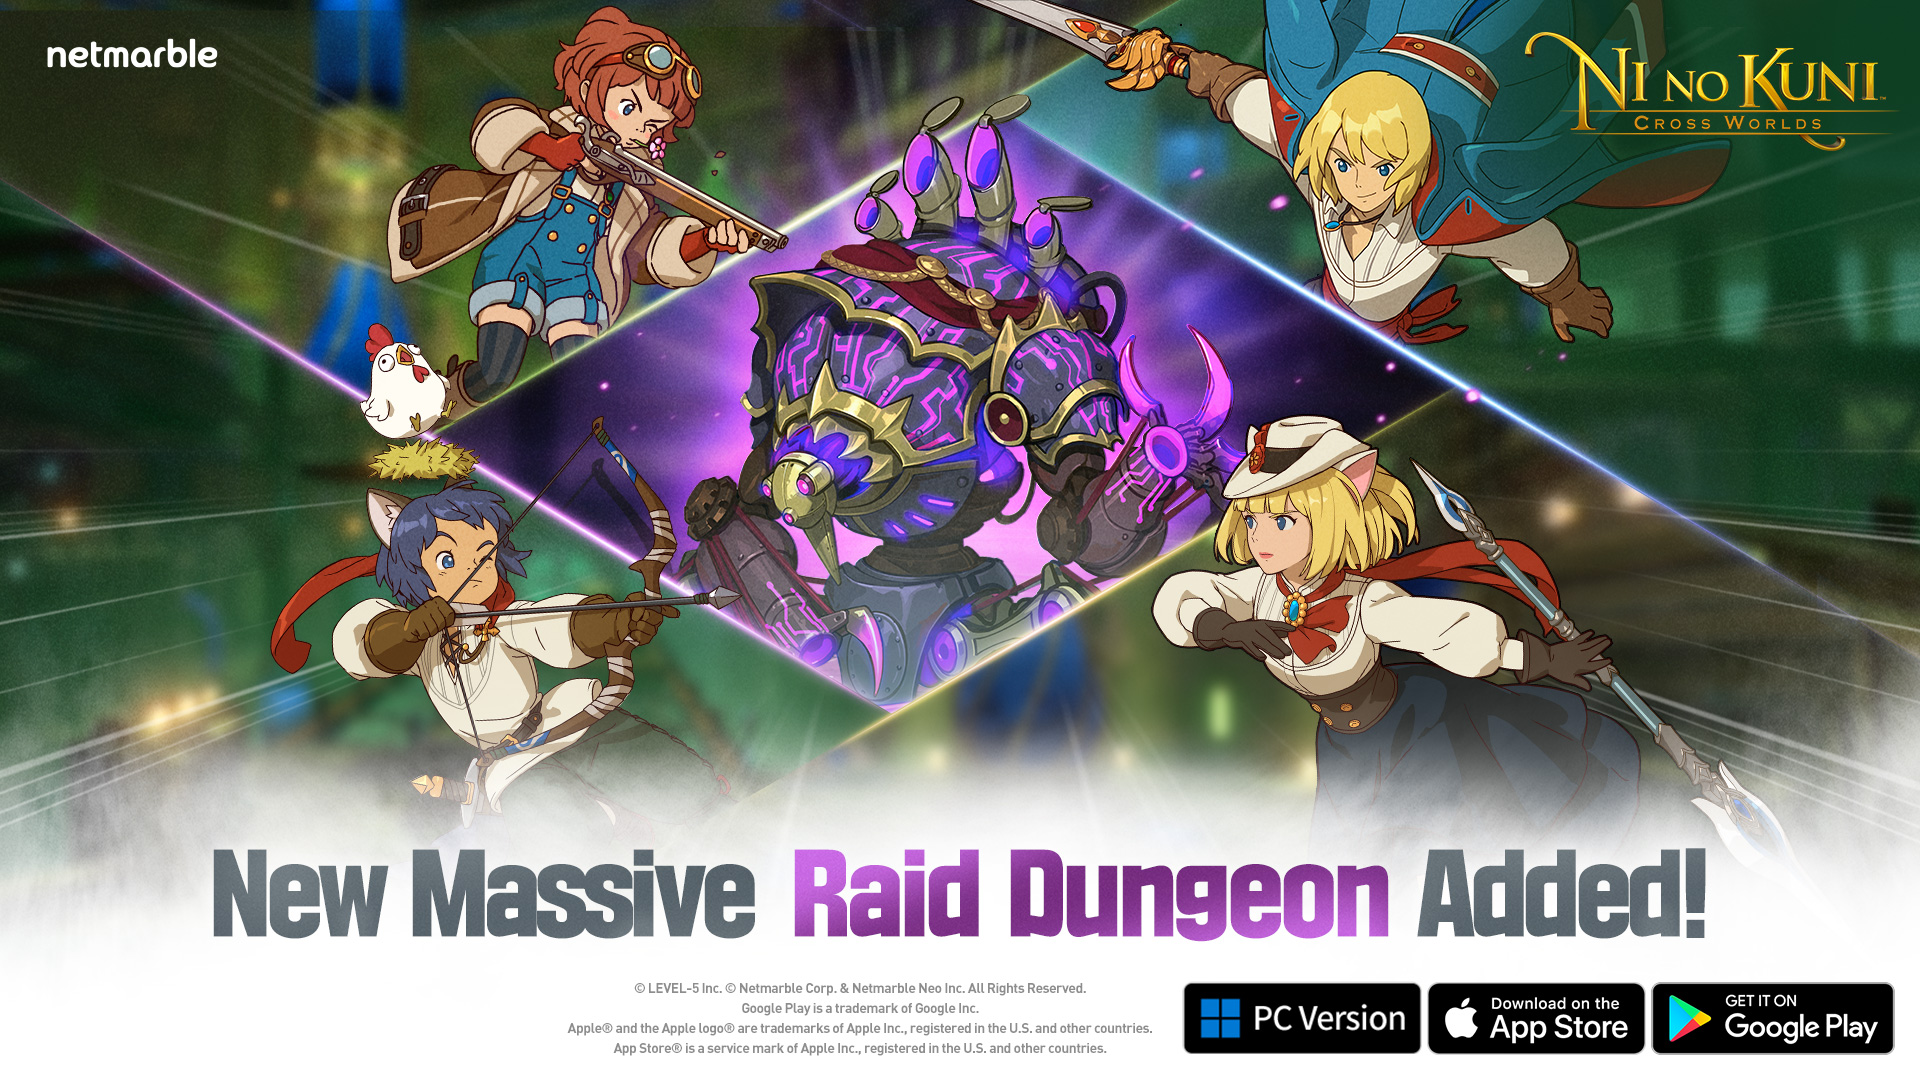 Seven Knights Idle Adventure adds new heroes and challenges in Halloween  2023 update